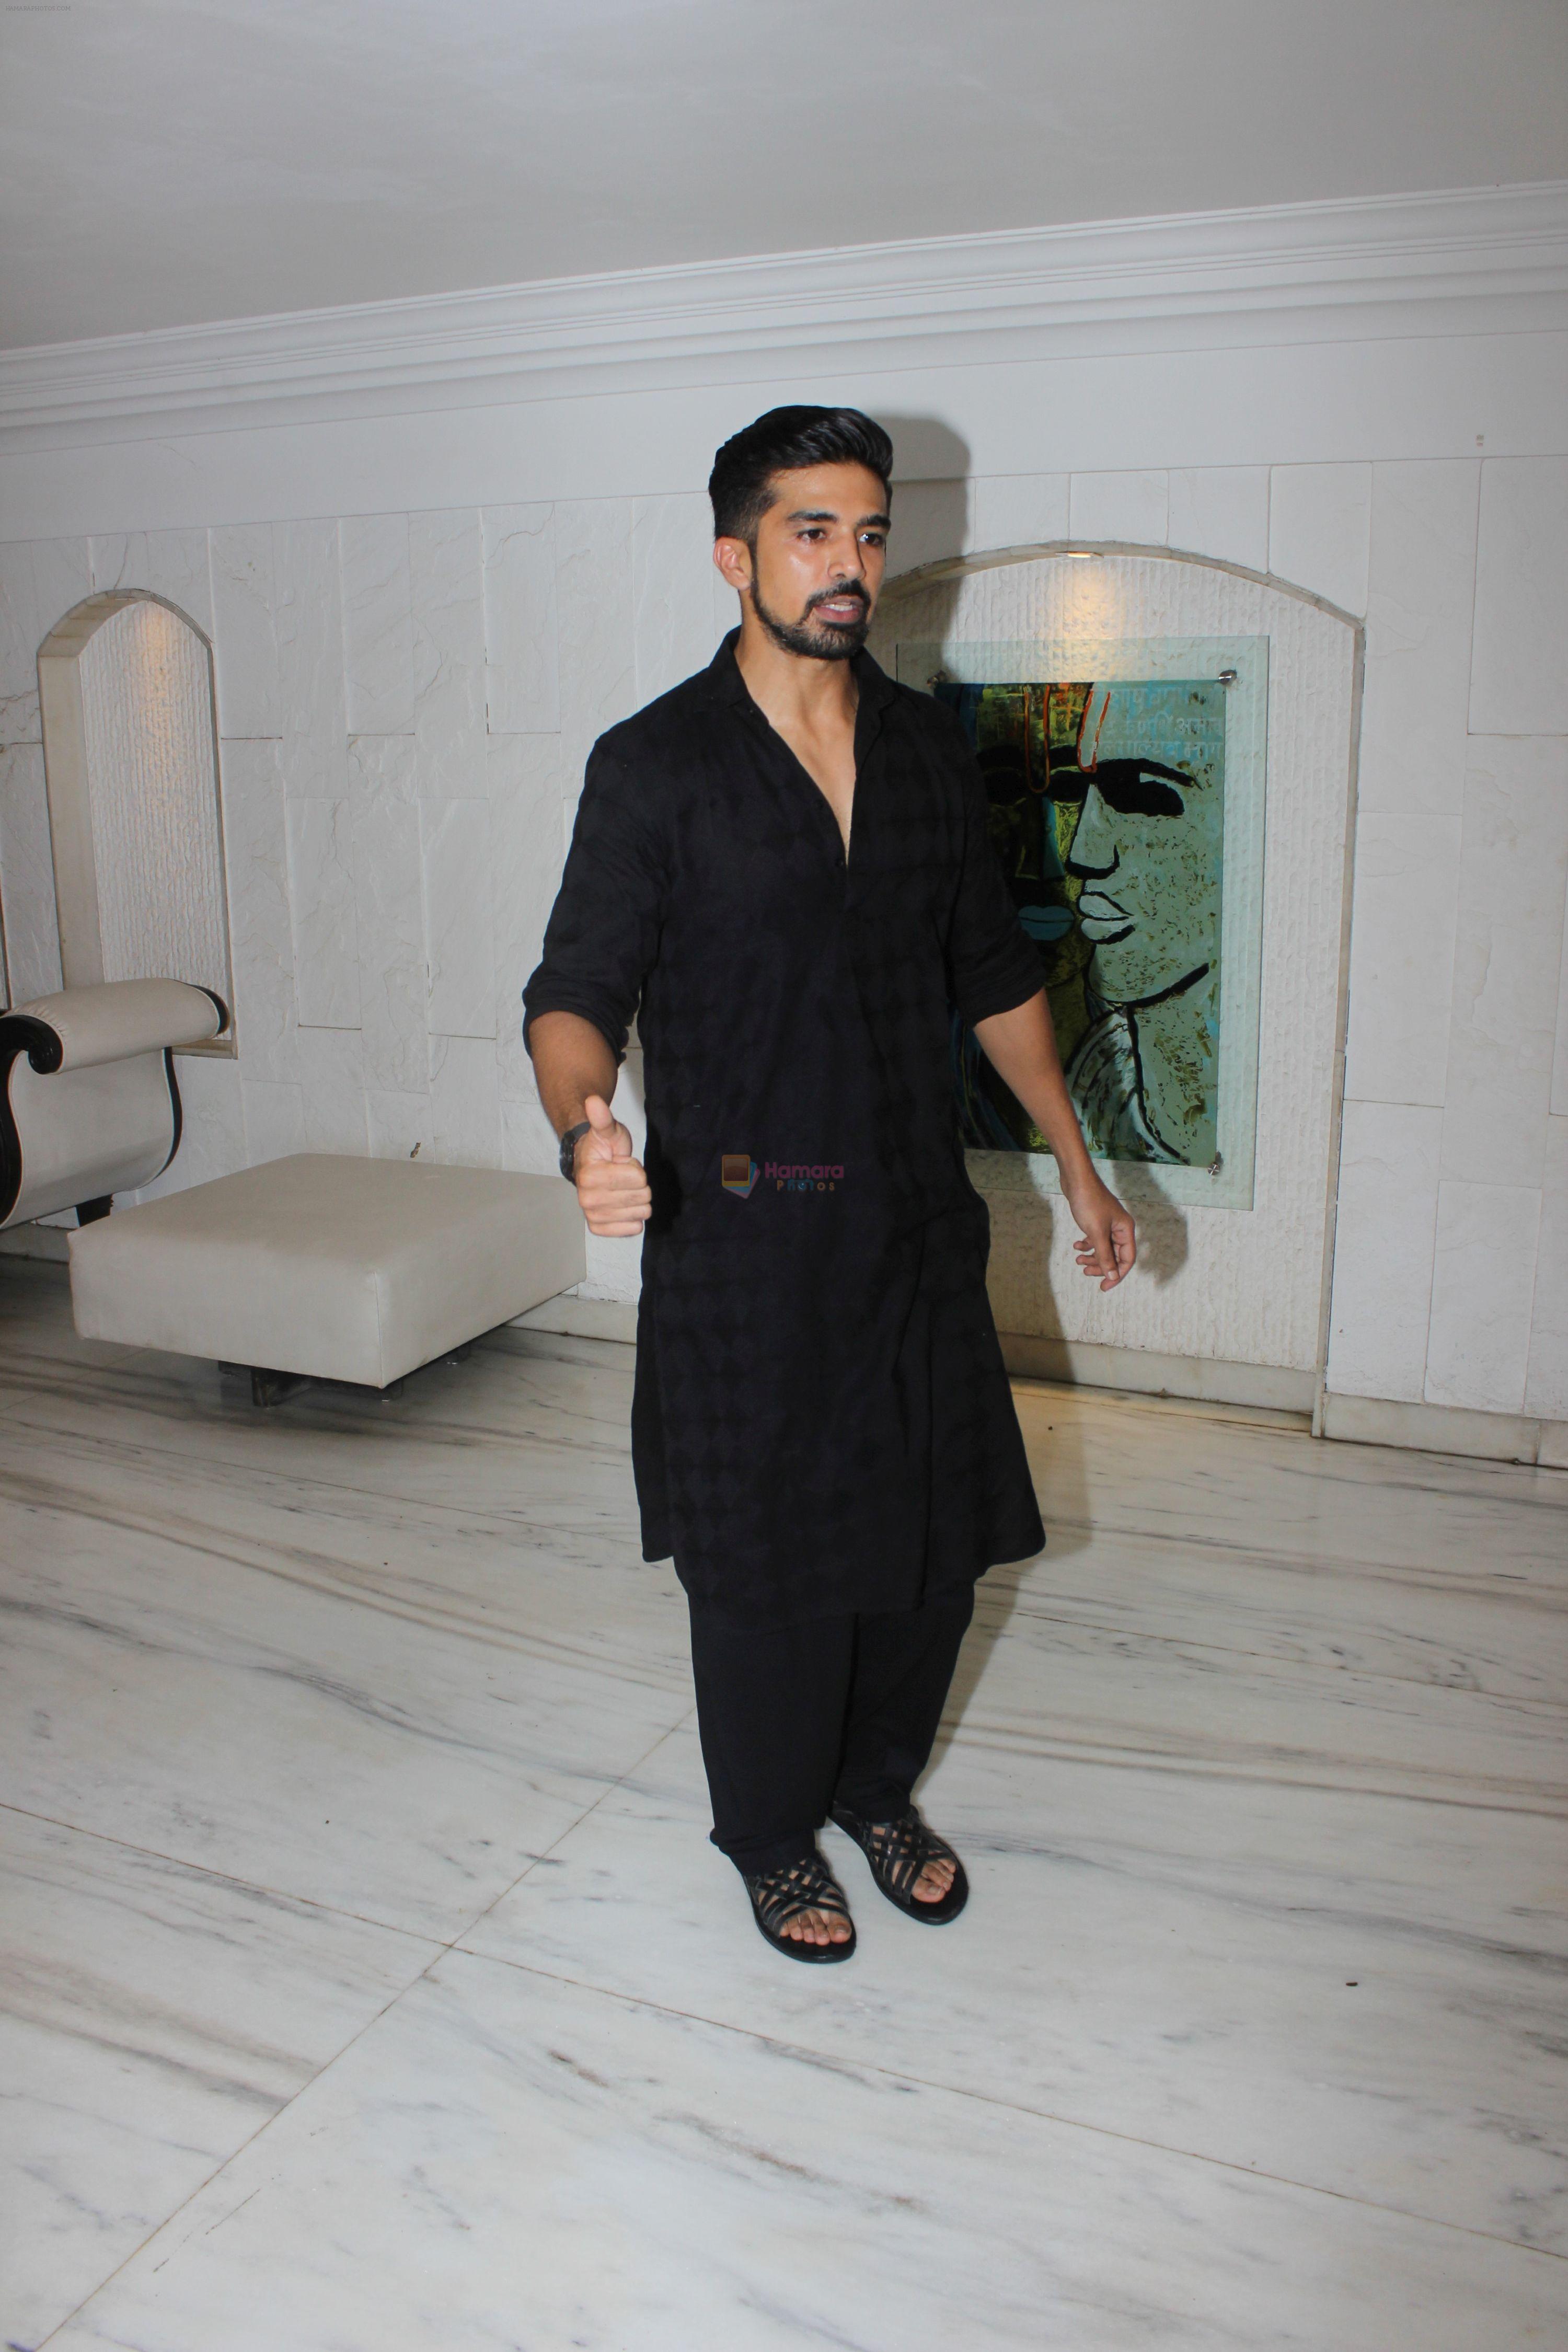 Saqib Saleem celebrated by giving Eid Party on 28th June 2017